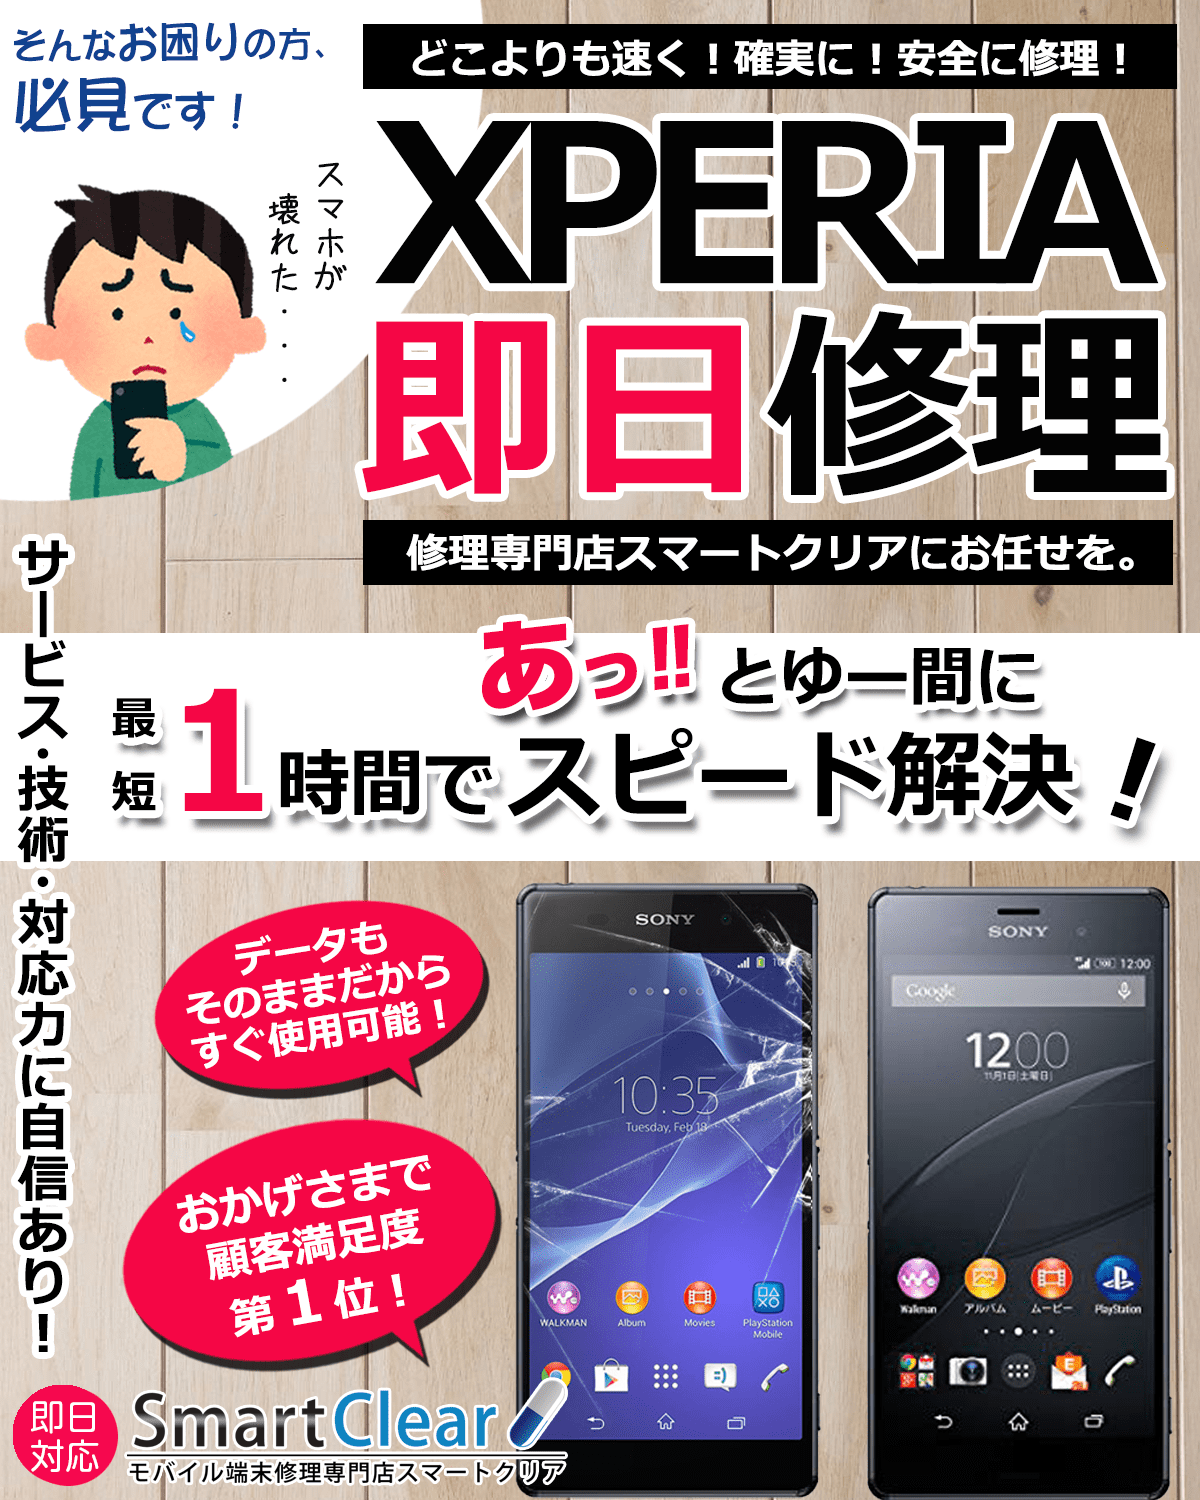 Xperia修理ならスマートクリアへ